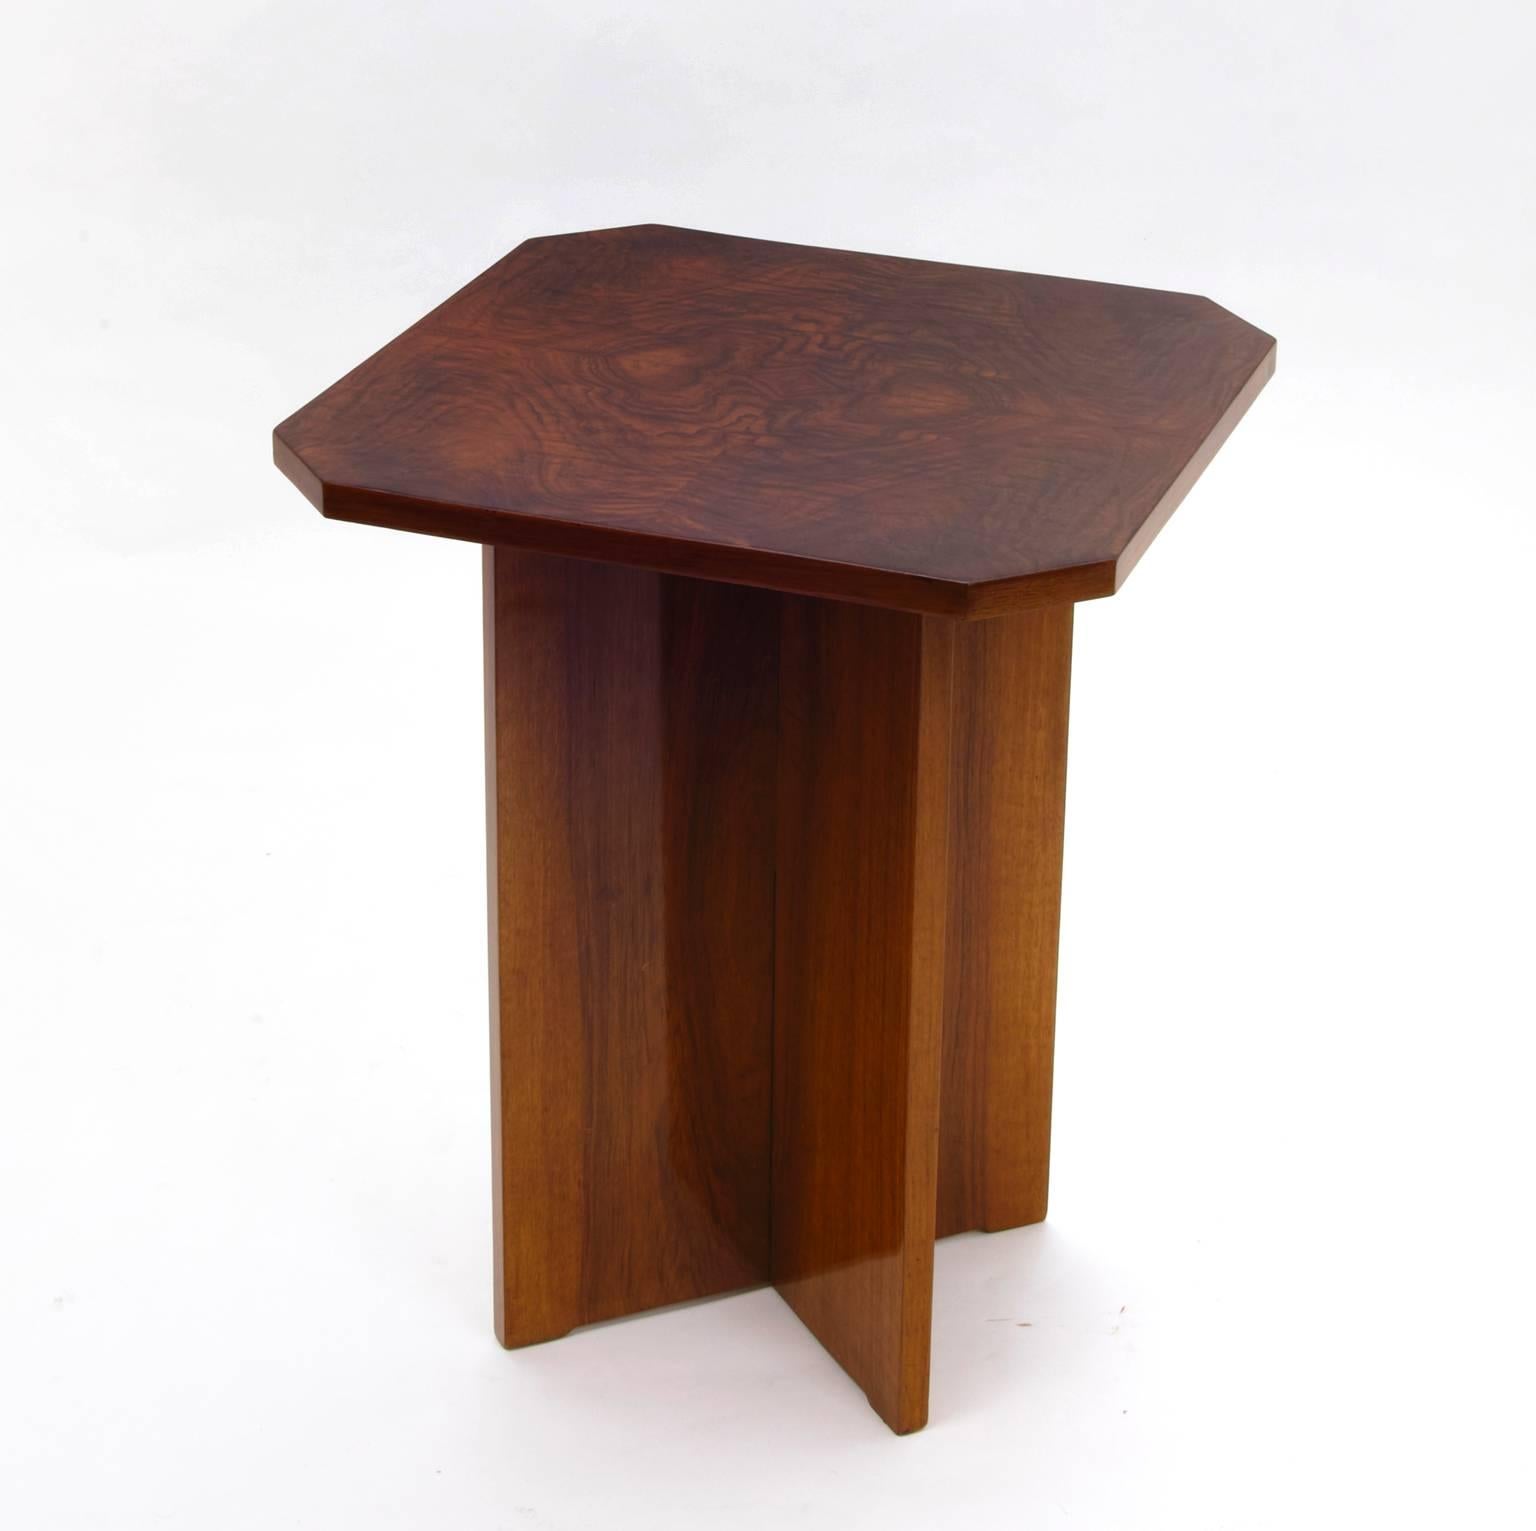 Art Deco side table with octagonal tabletop and X-shaped footing.